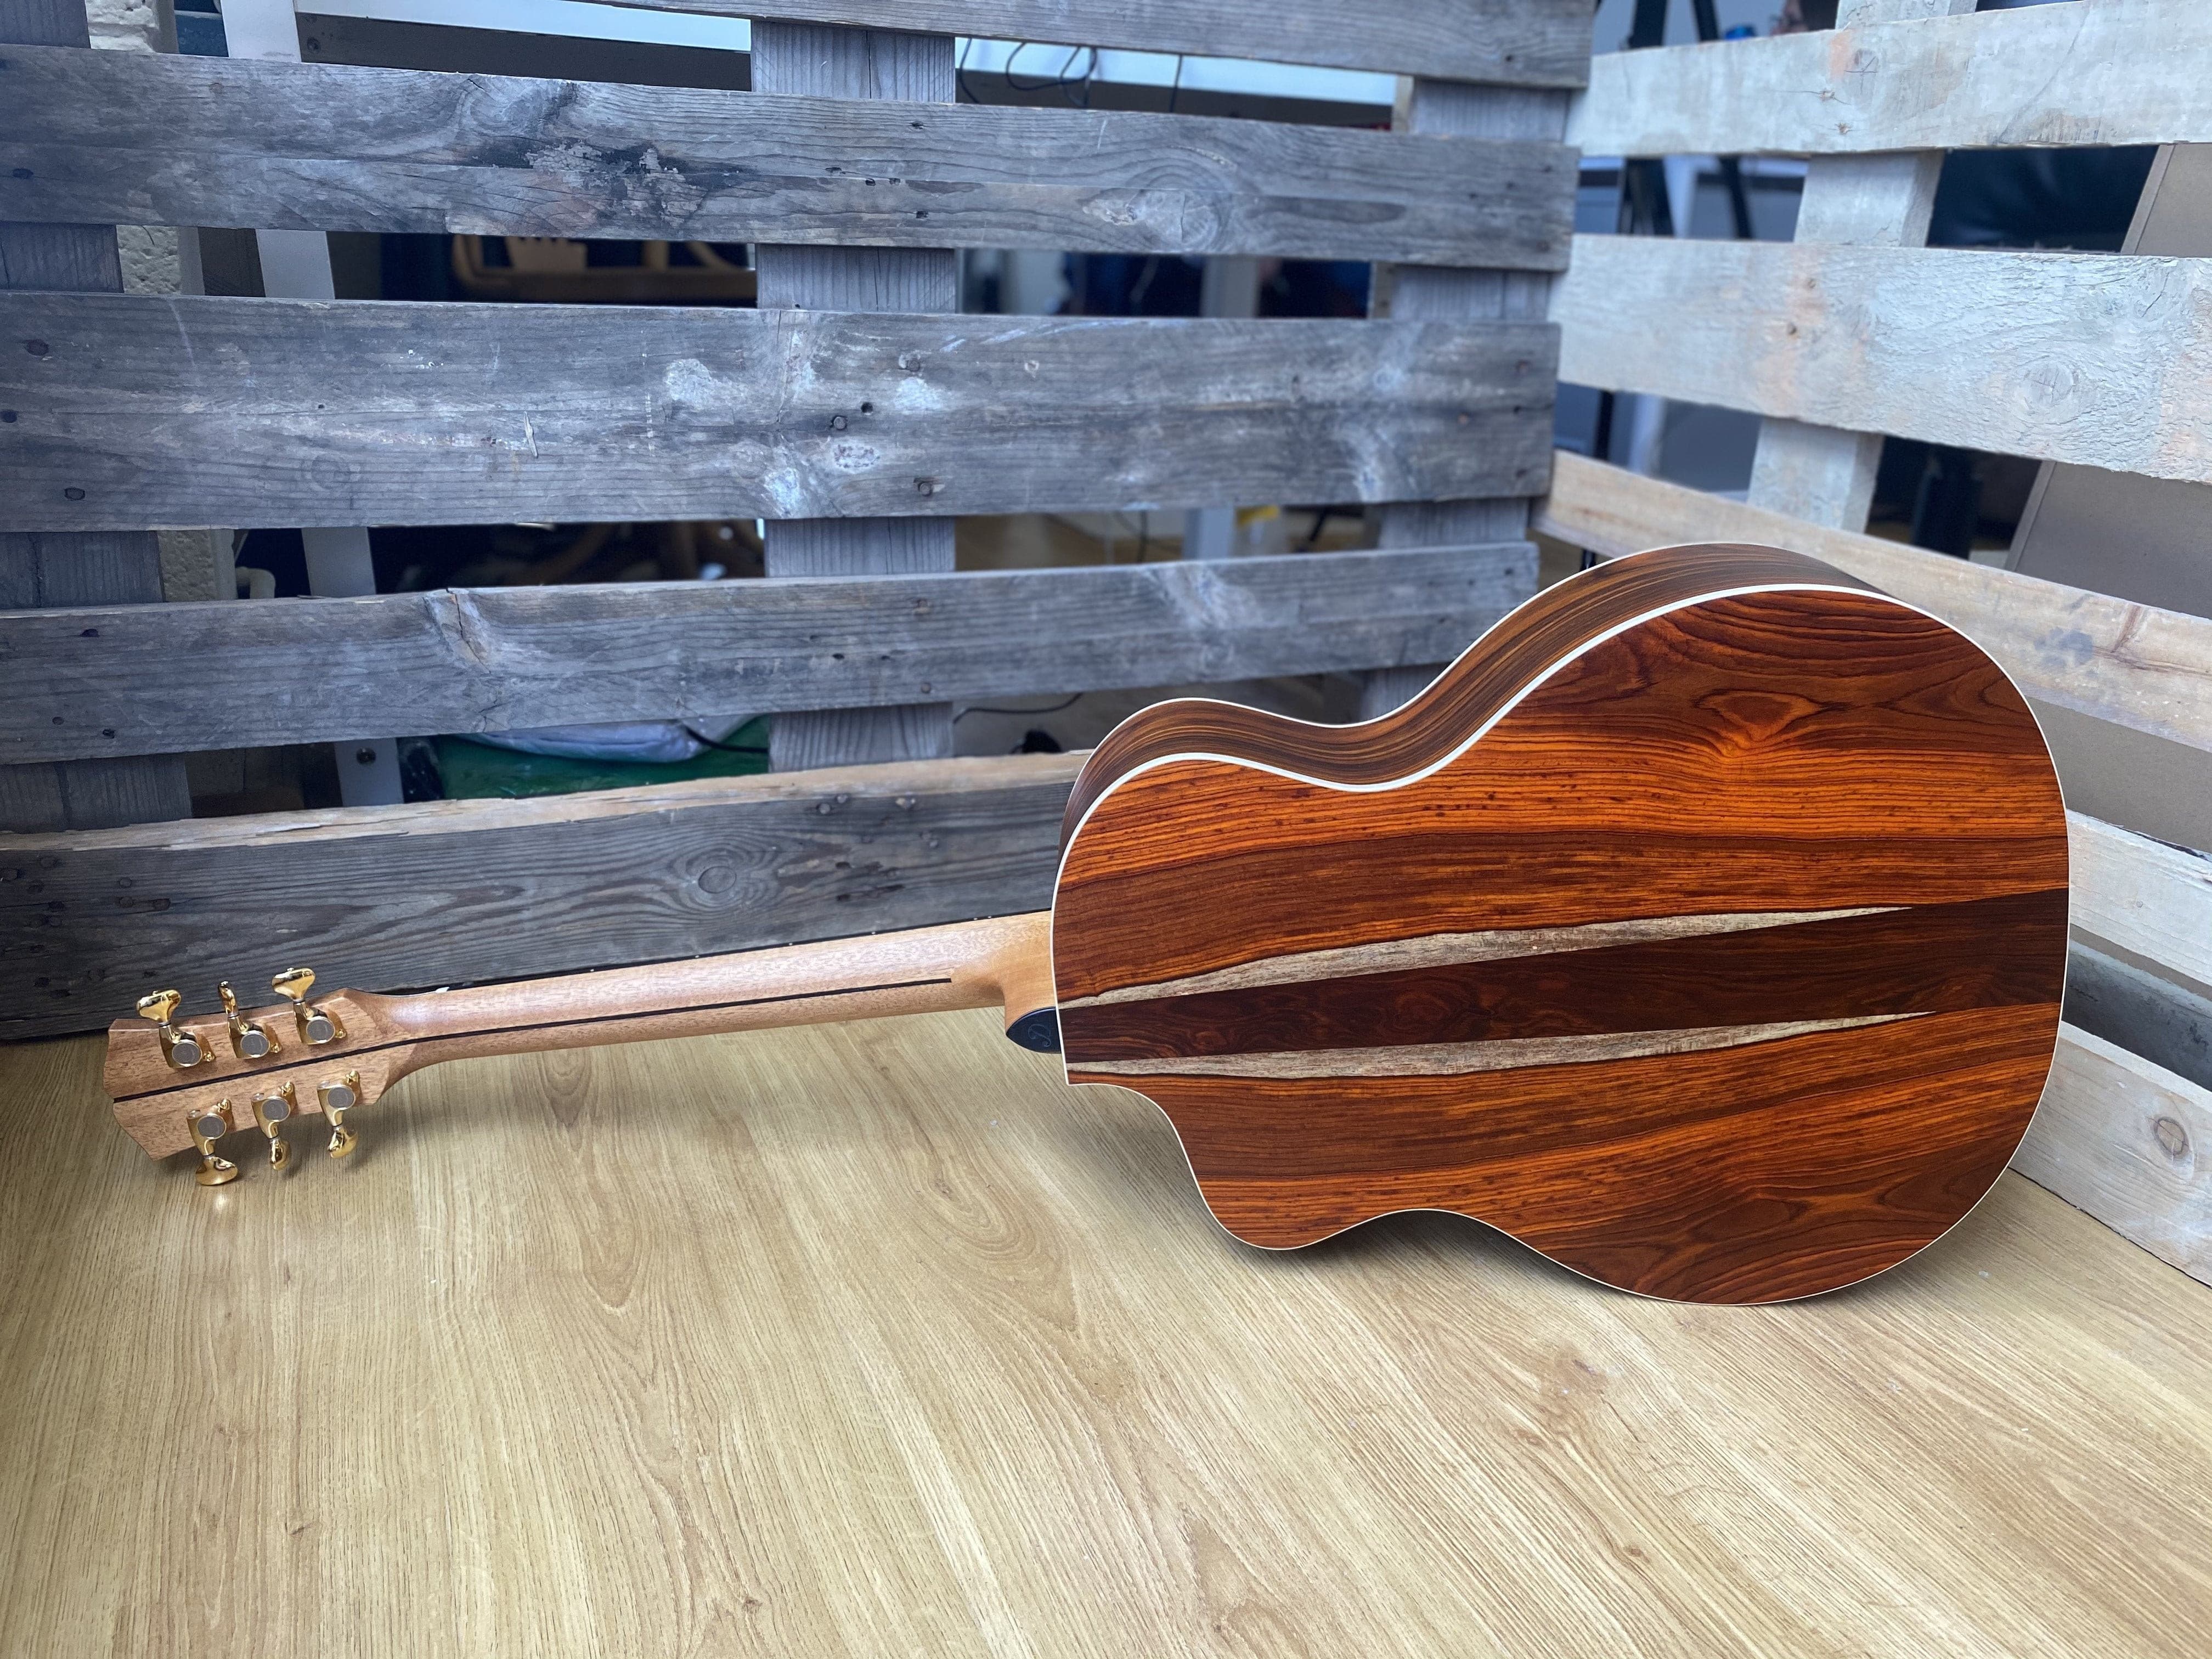 Dowina Cocobolo Trio Plate (Cocobolo III) GACE With LR Baggs Anthem, Acoustic Guitar for sale at Richards Guitars.